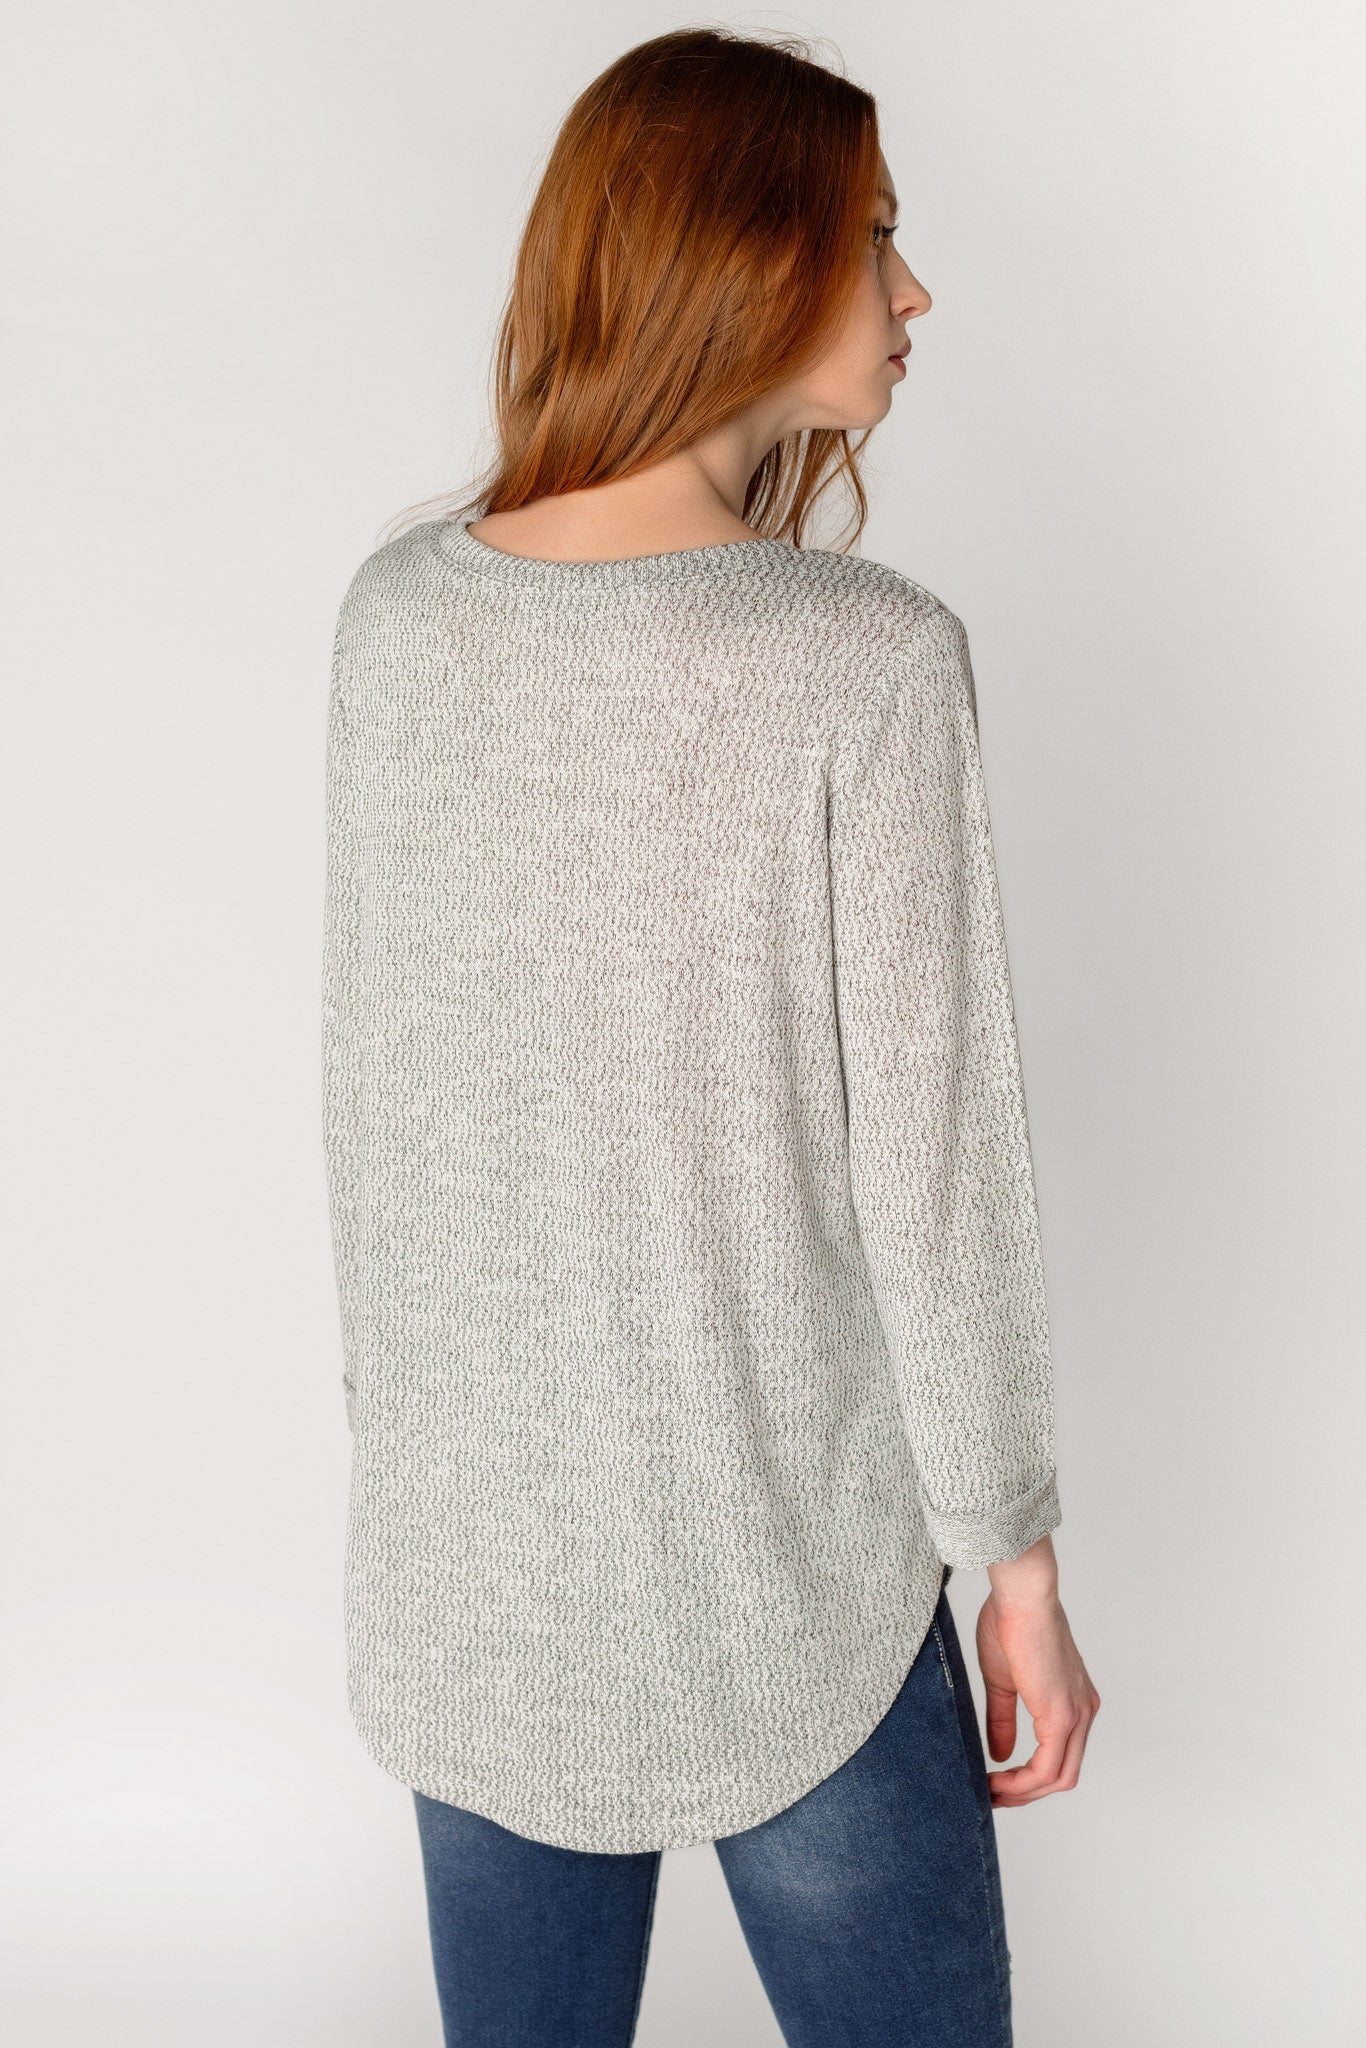 Knitted 3/4 Sleeve Scoopneck Sweater